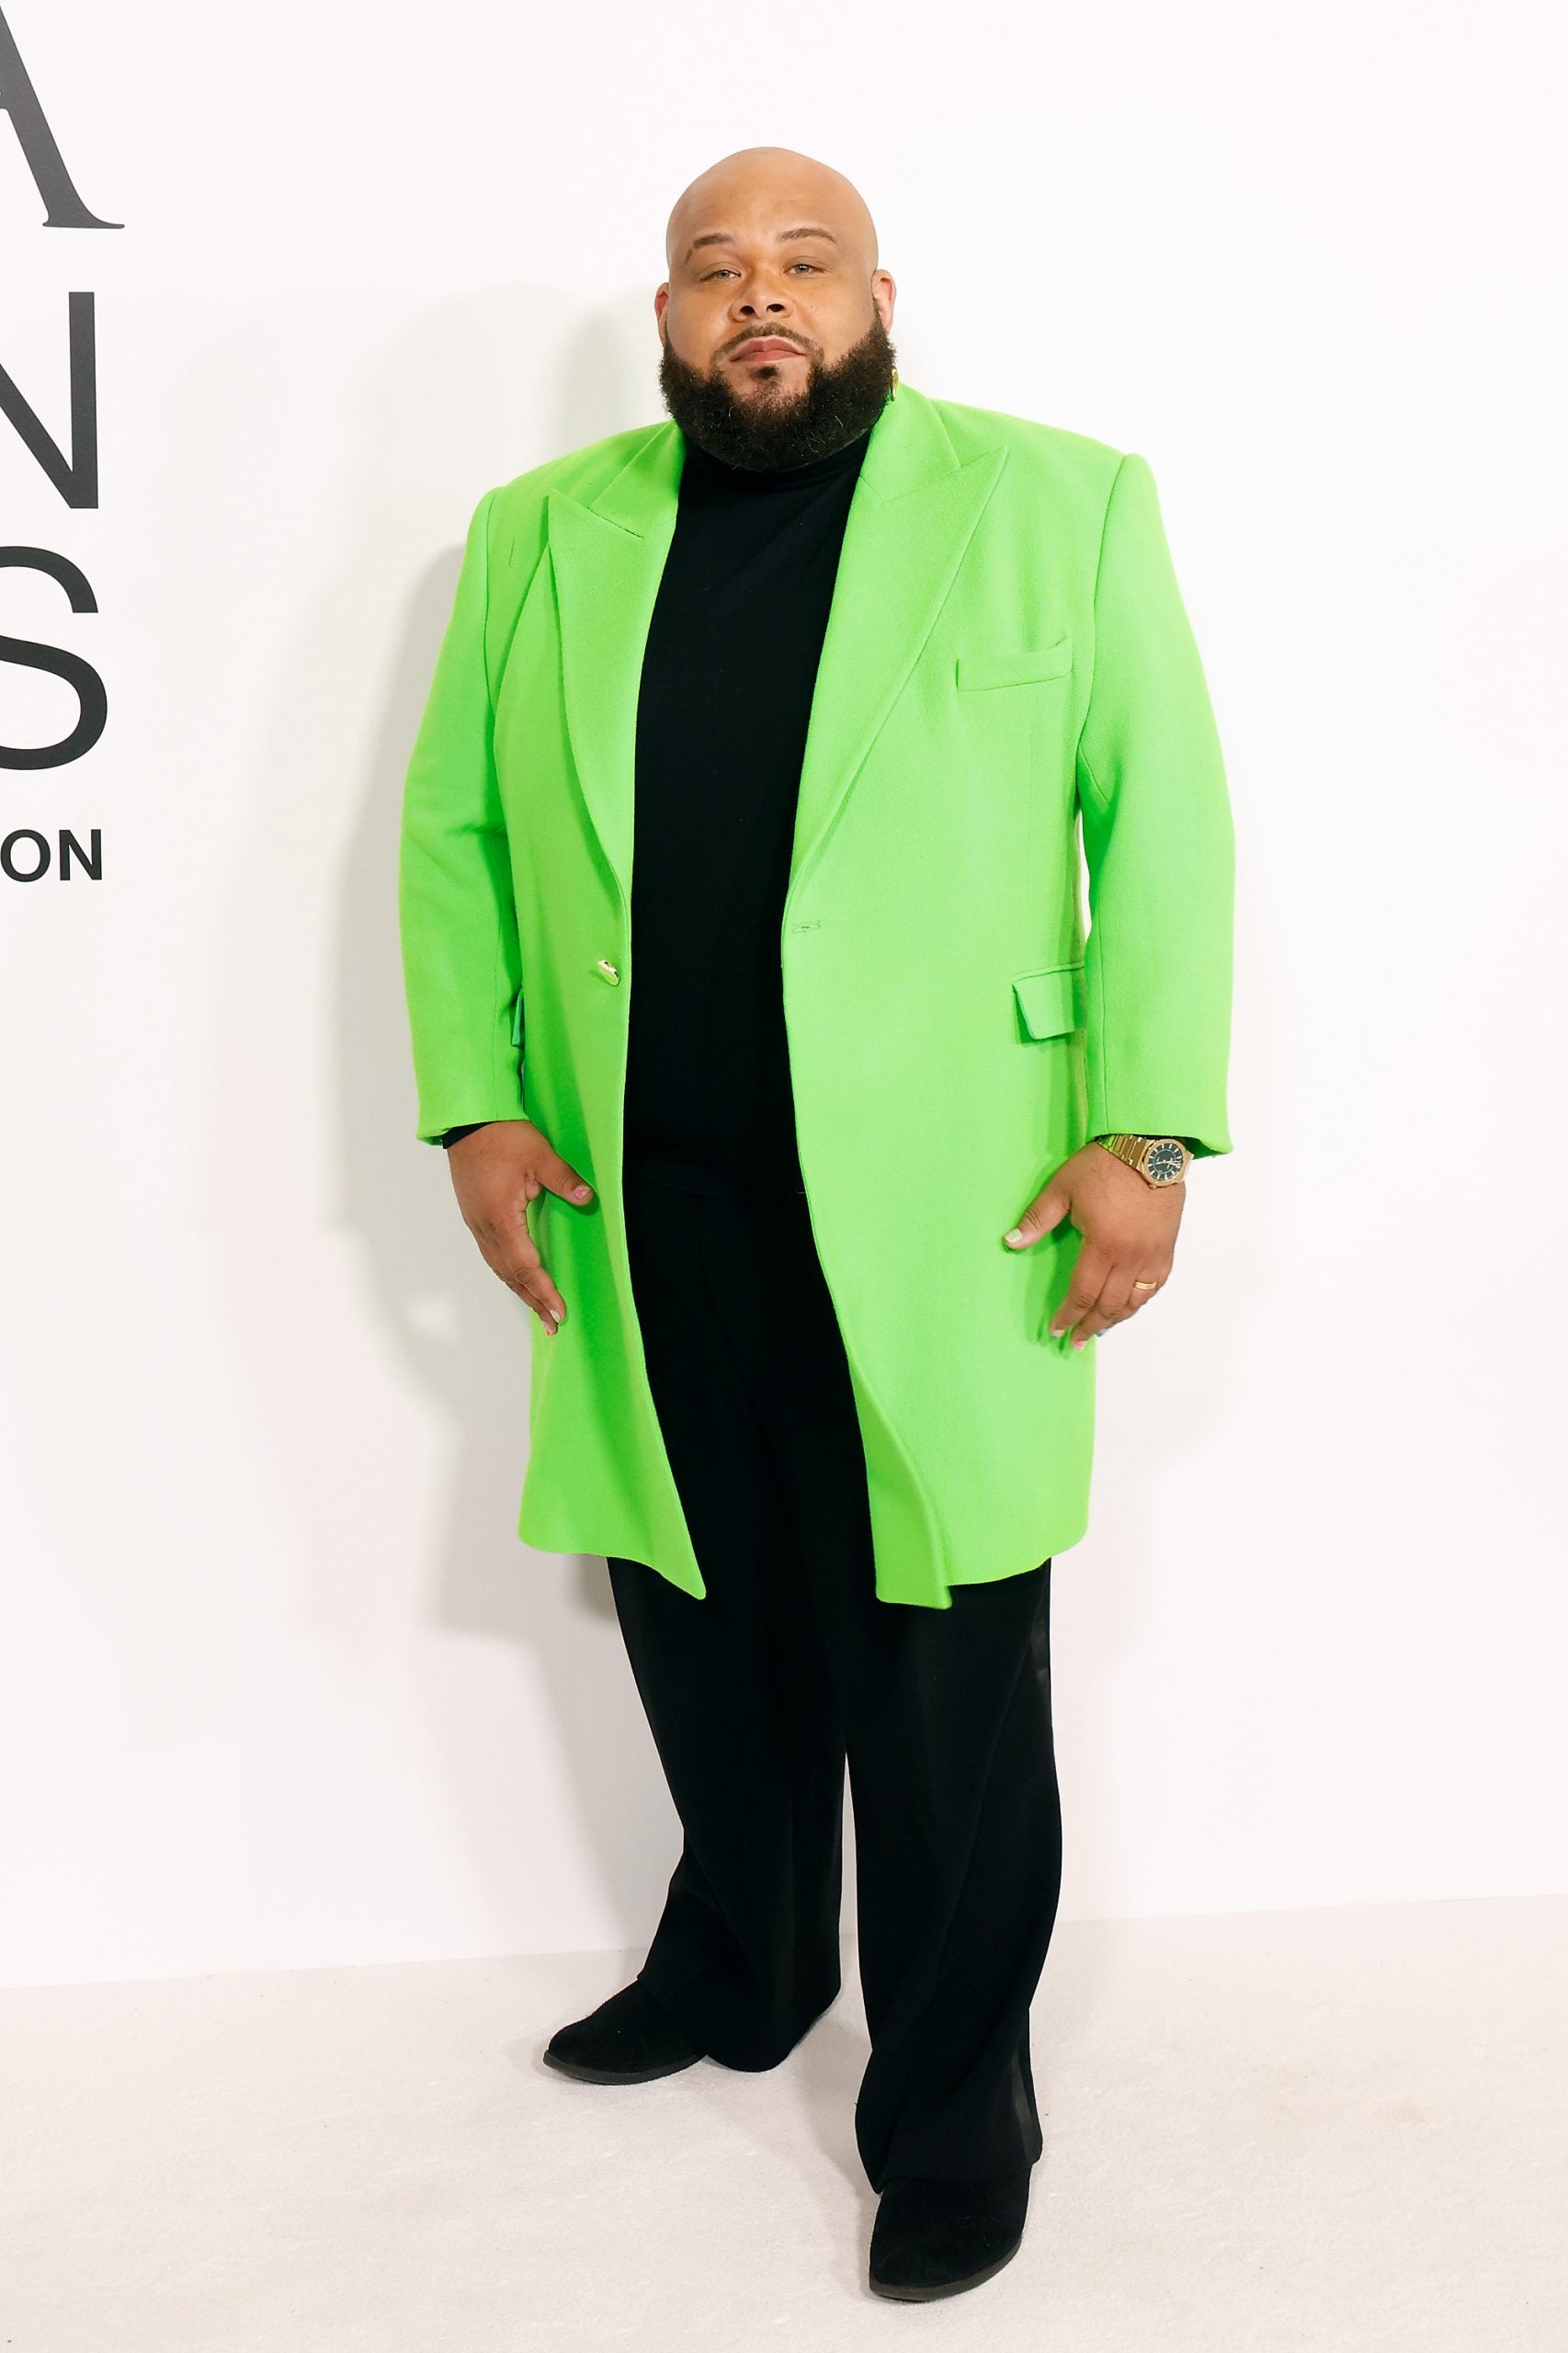 The Best Dressed Celebrities At The 2023 CFDA Awards: Mary J. Blige, June Ambrose, And More